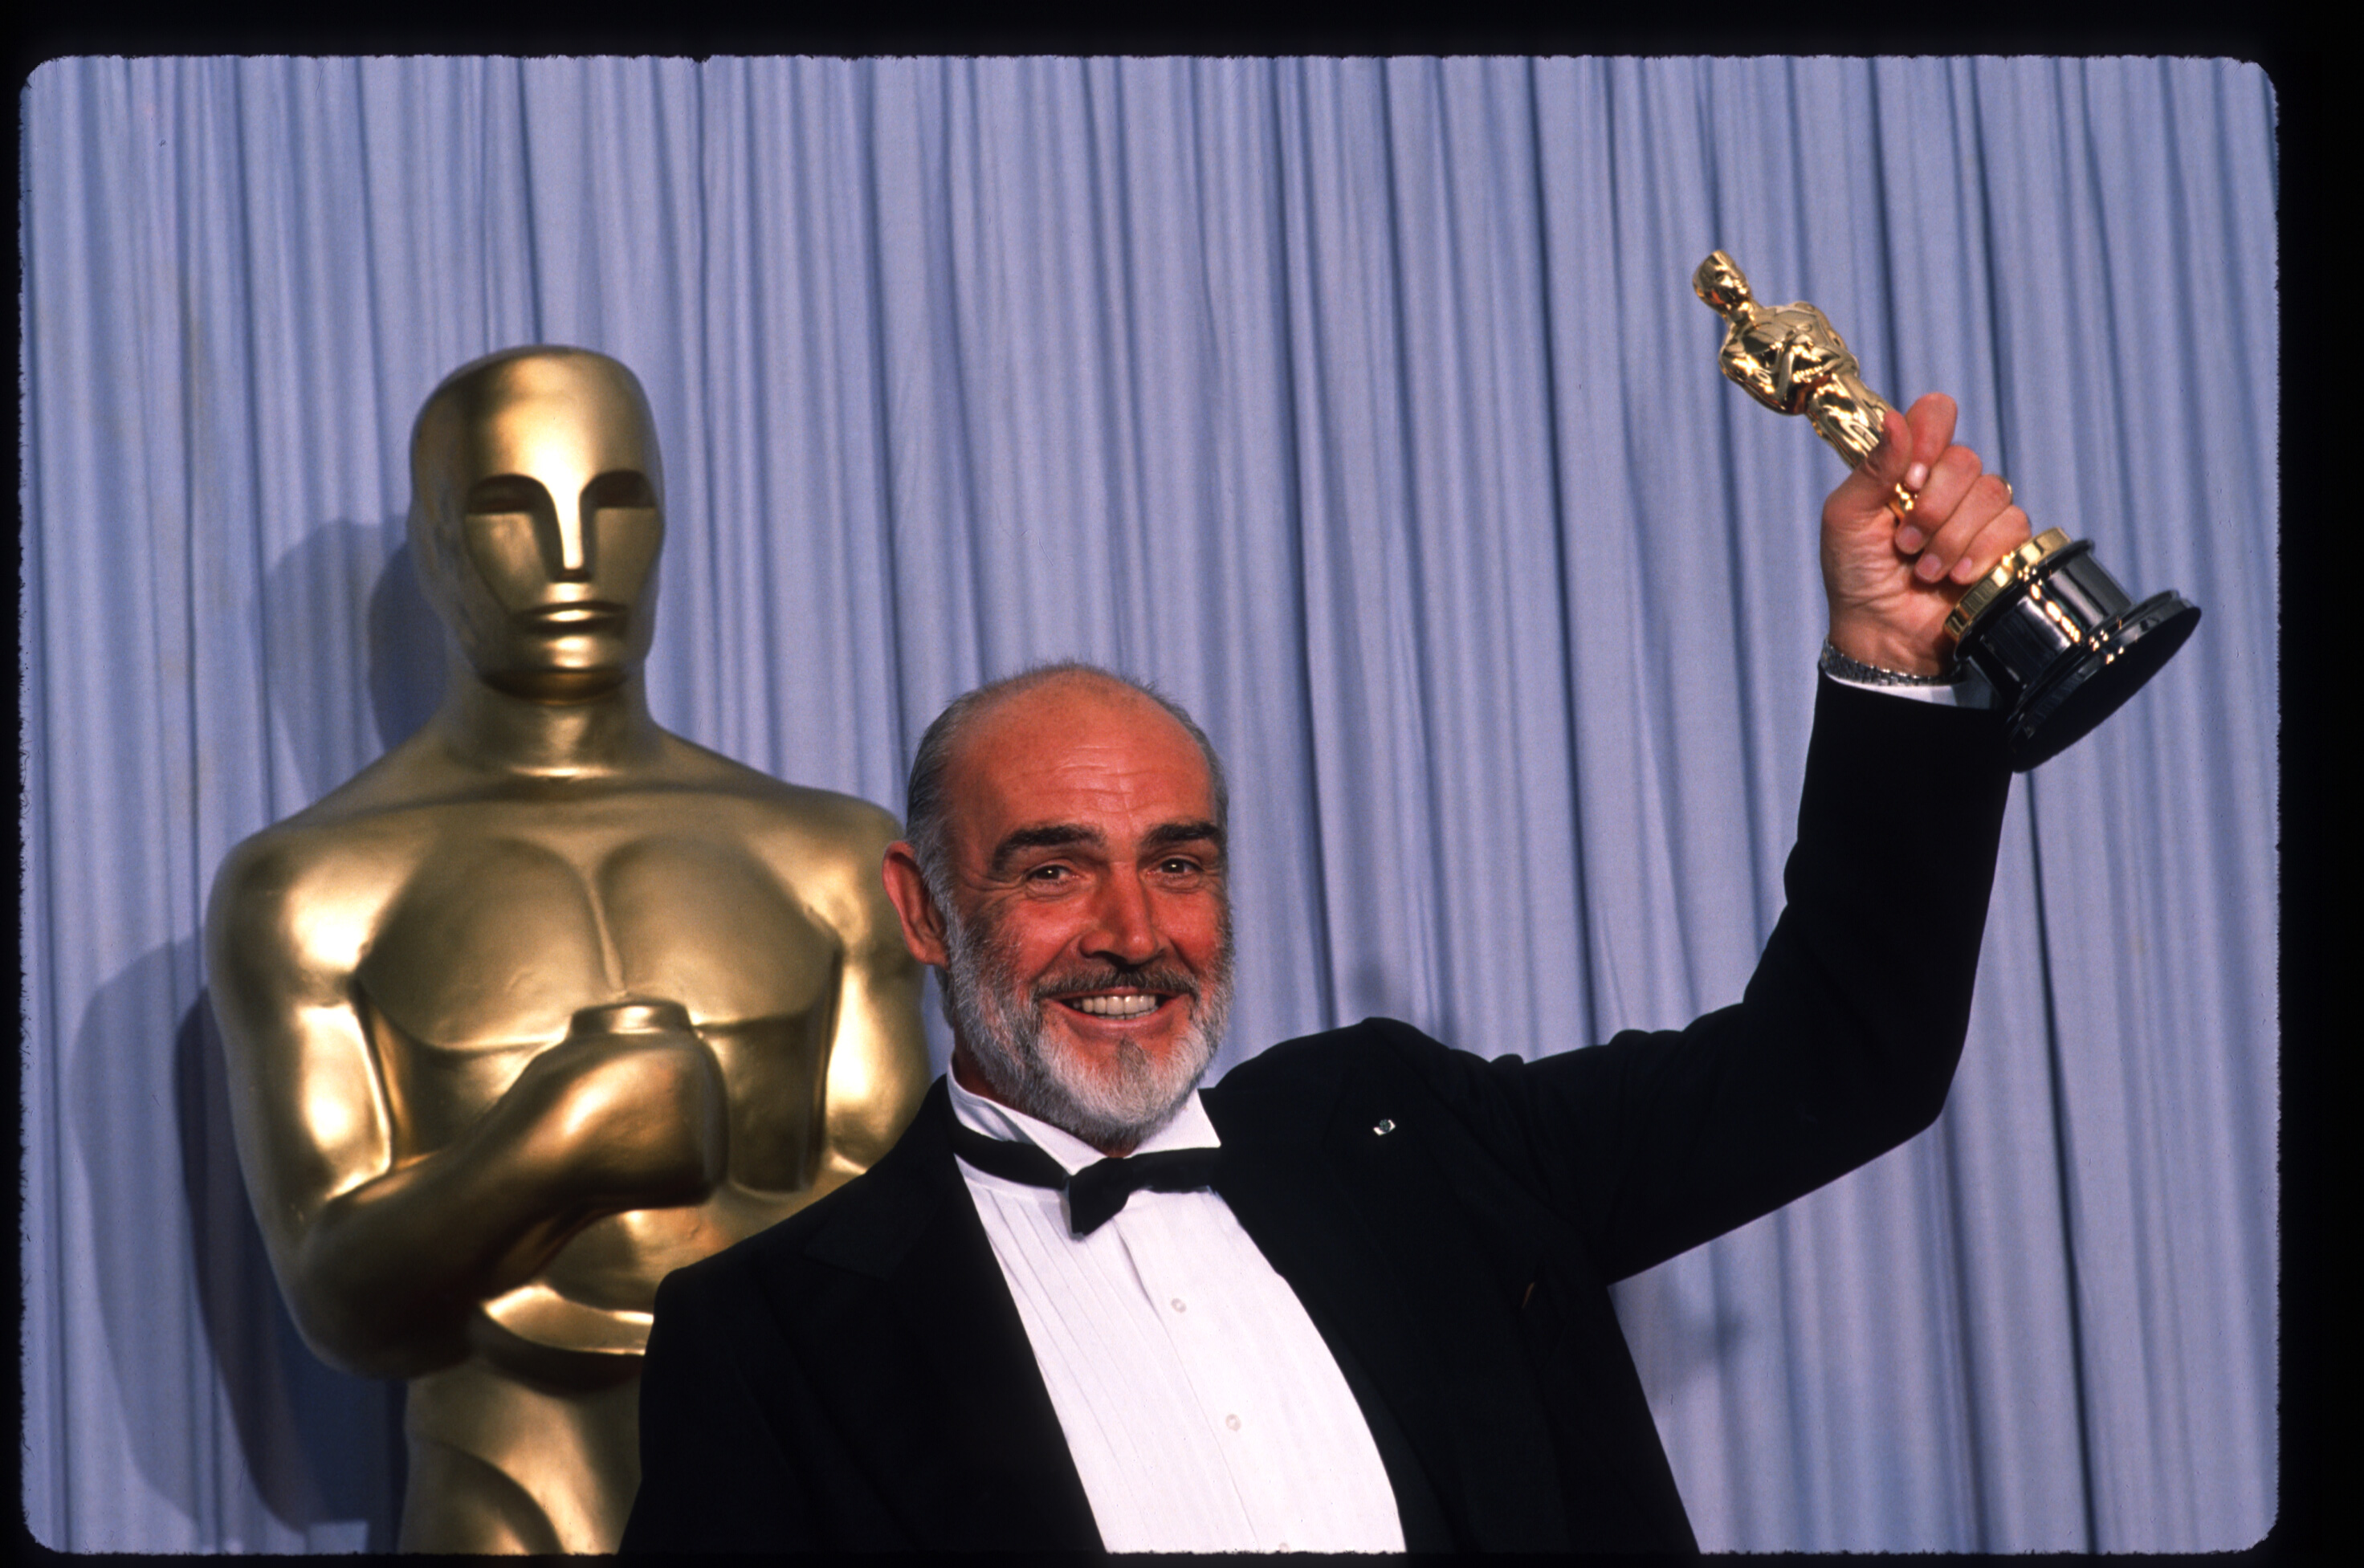 Sean Connery accepting his Academy Award for Best Supporting Actor in 1988